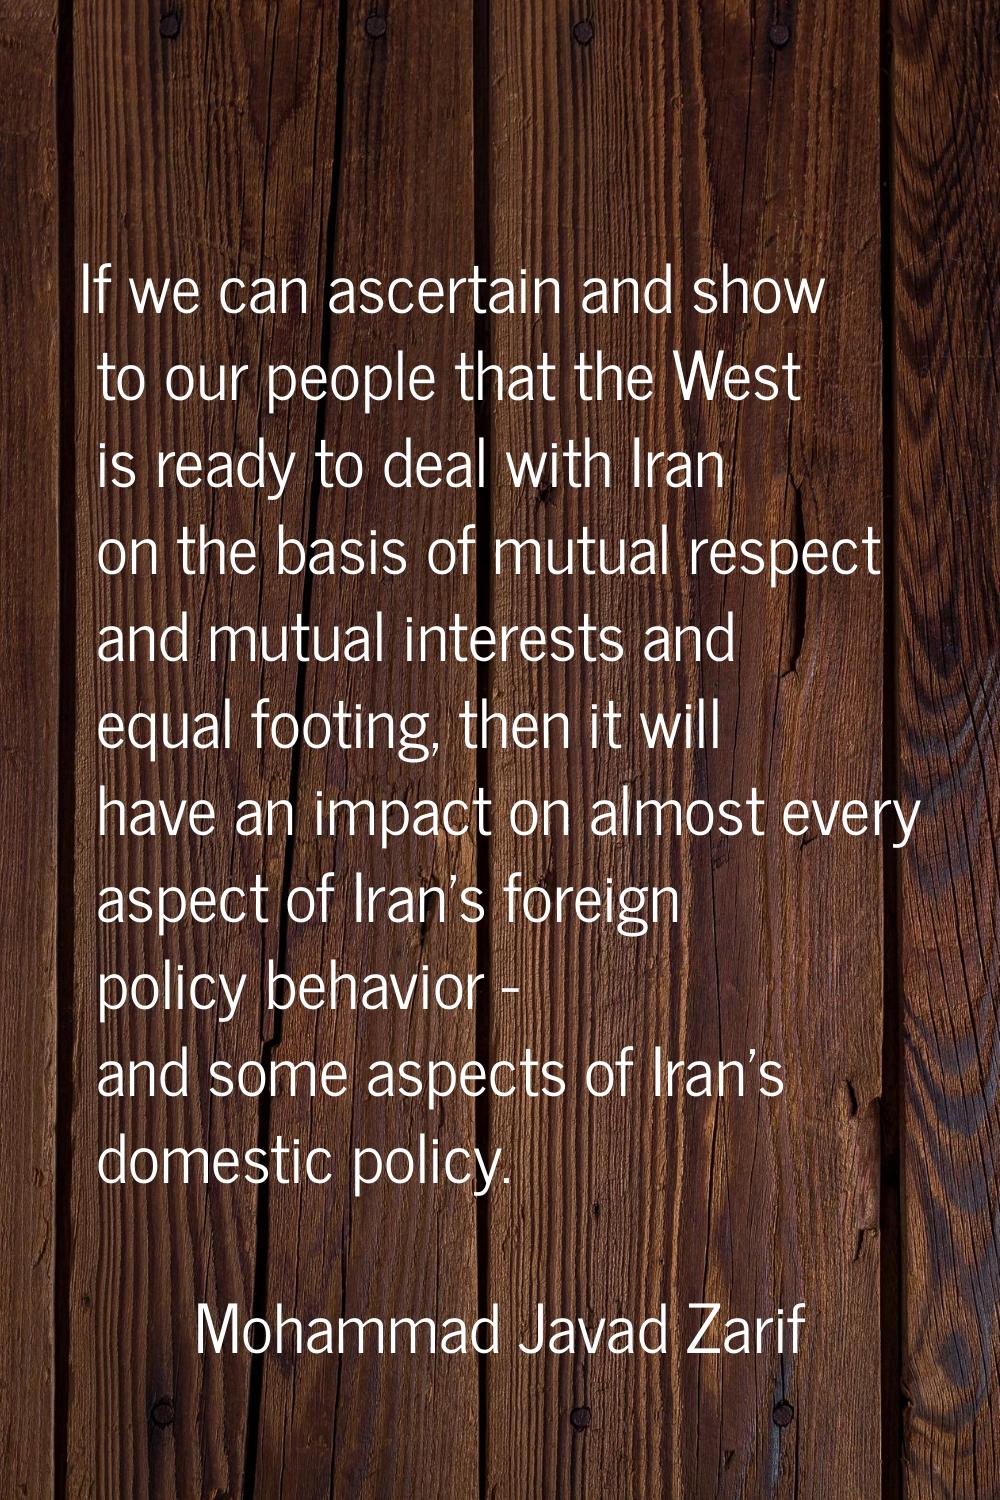 If we can ascertain and show to our people that the West is ready to deal with Iran on the basis of